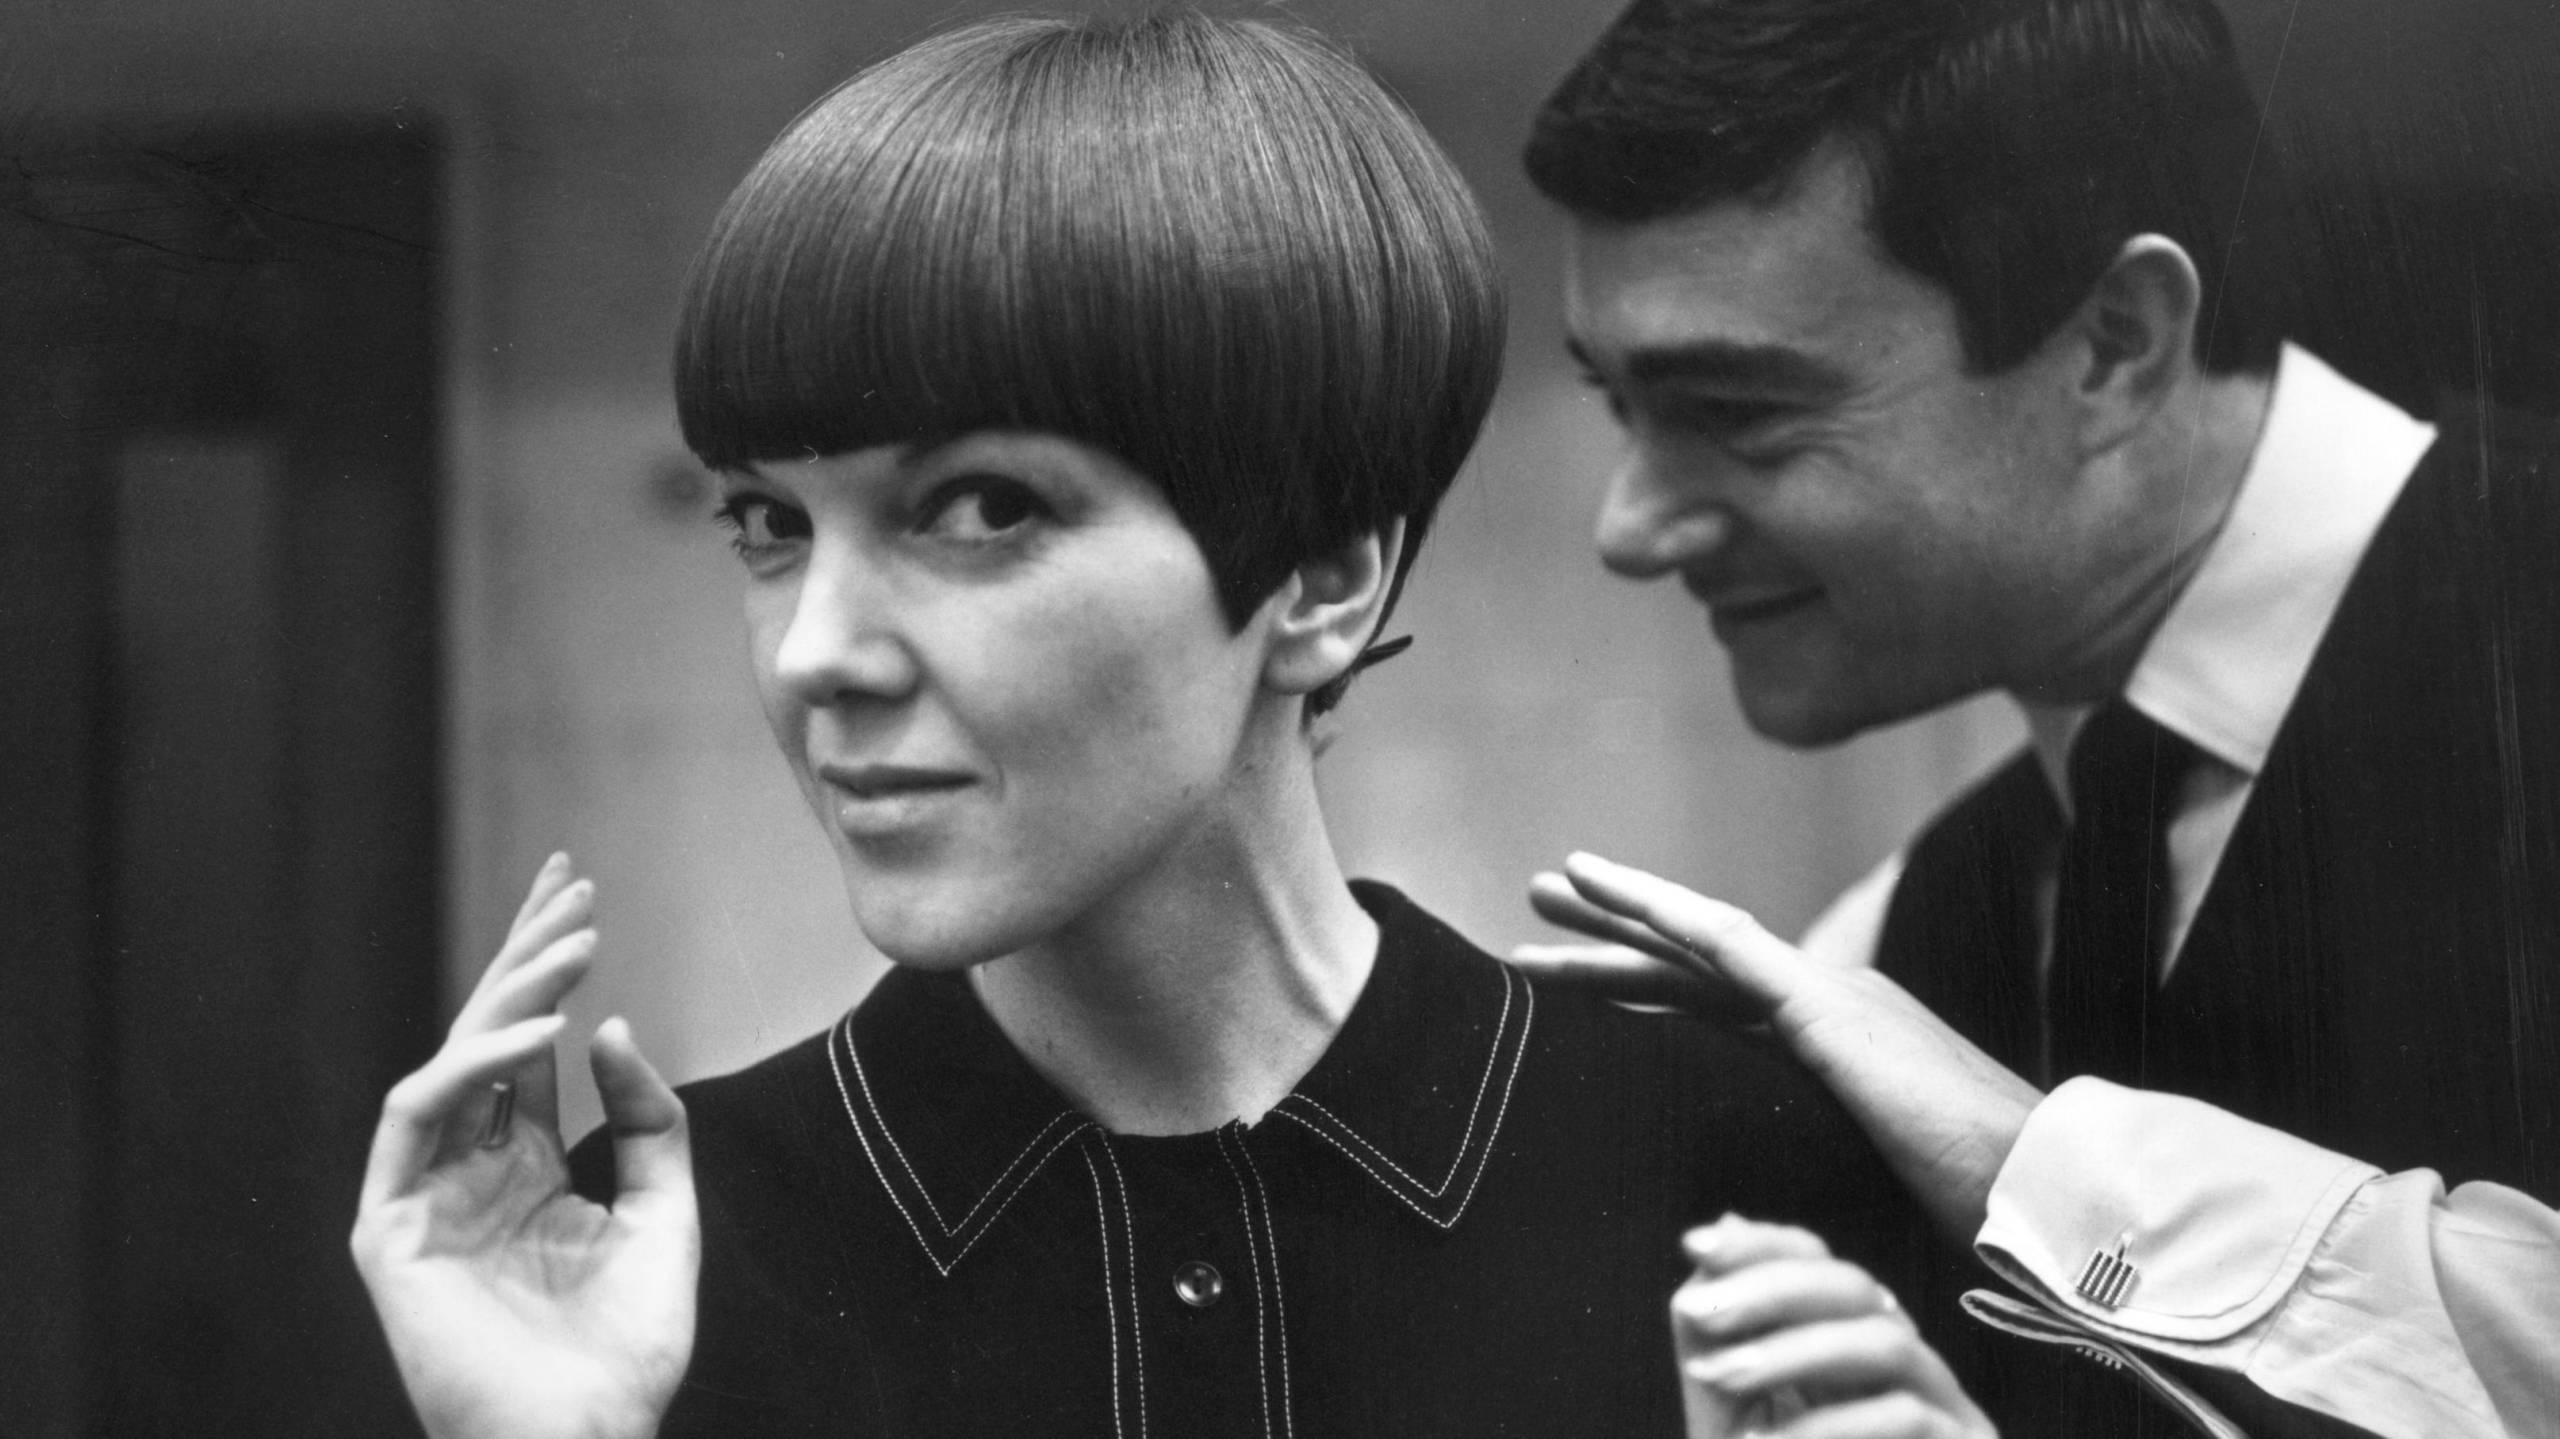 Black and white photo of woman with precise bob haircut in mod-style dress